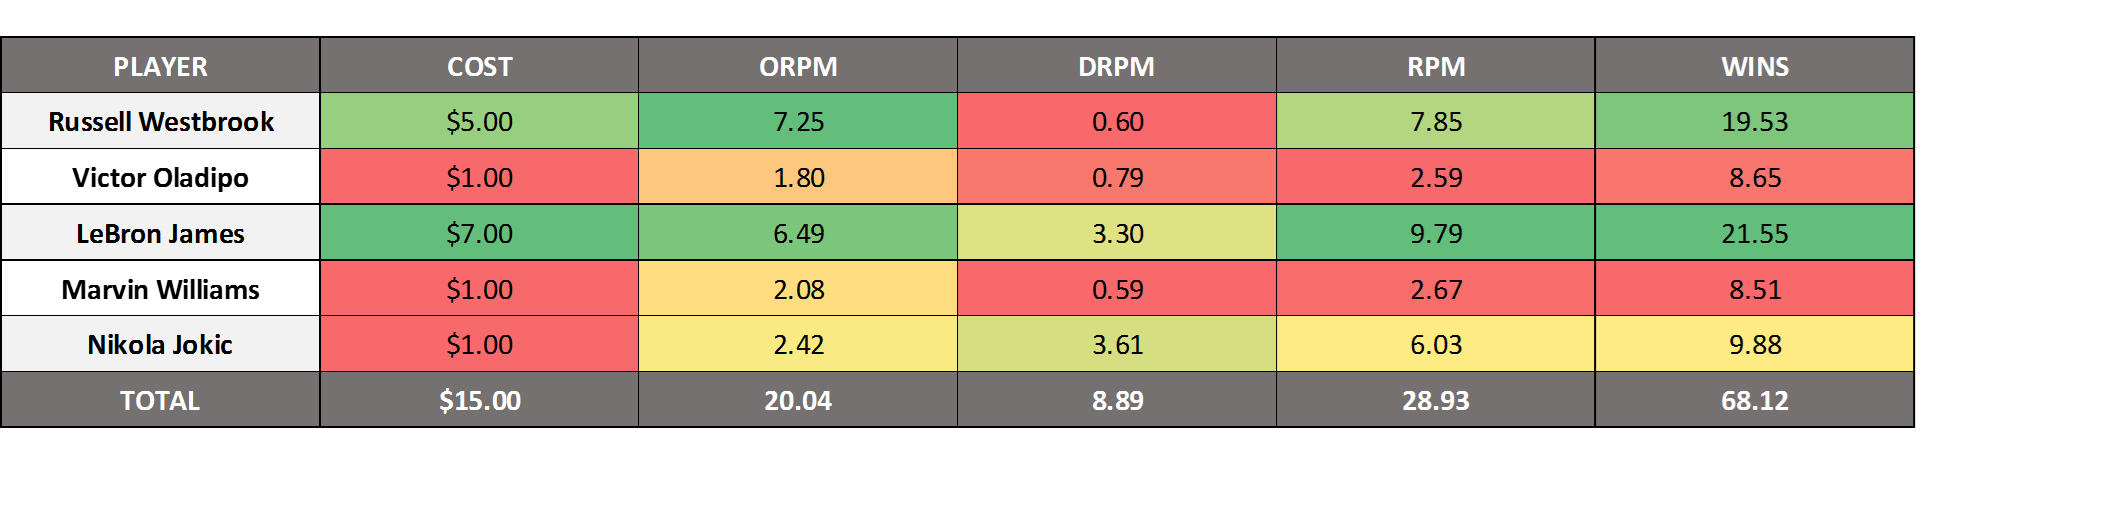 Maximize ORPM, Limit PG and C position to <=1, Don't Allow Negative DRPM Players